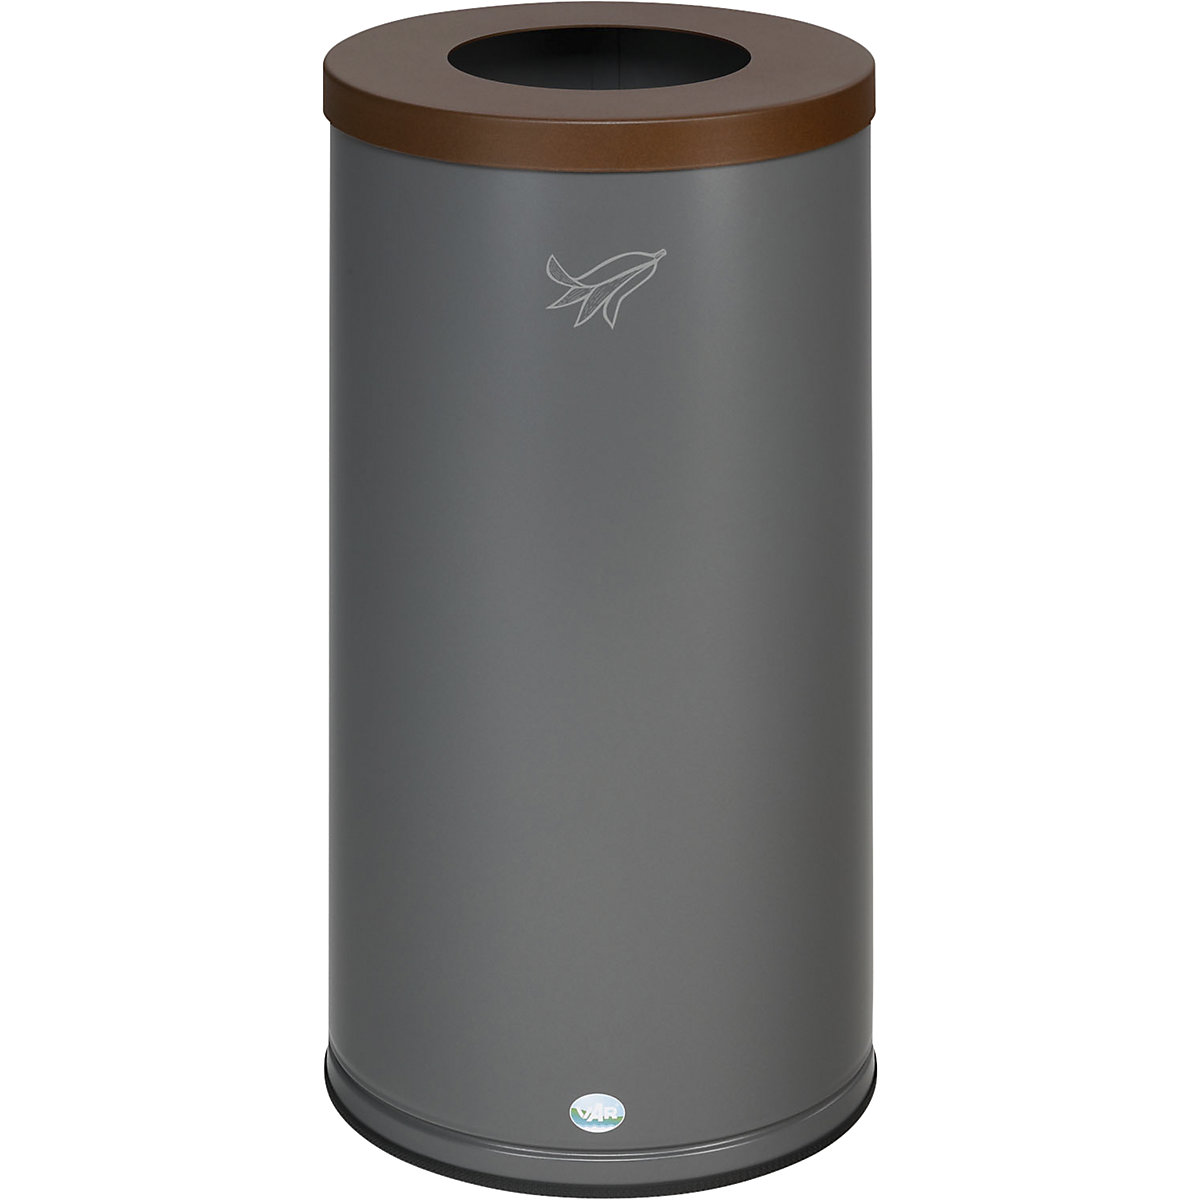 Recyclable waste collector, brown - eurokraft basic